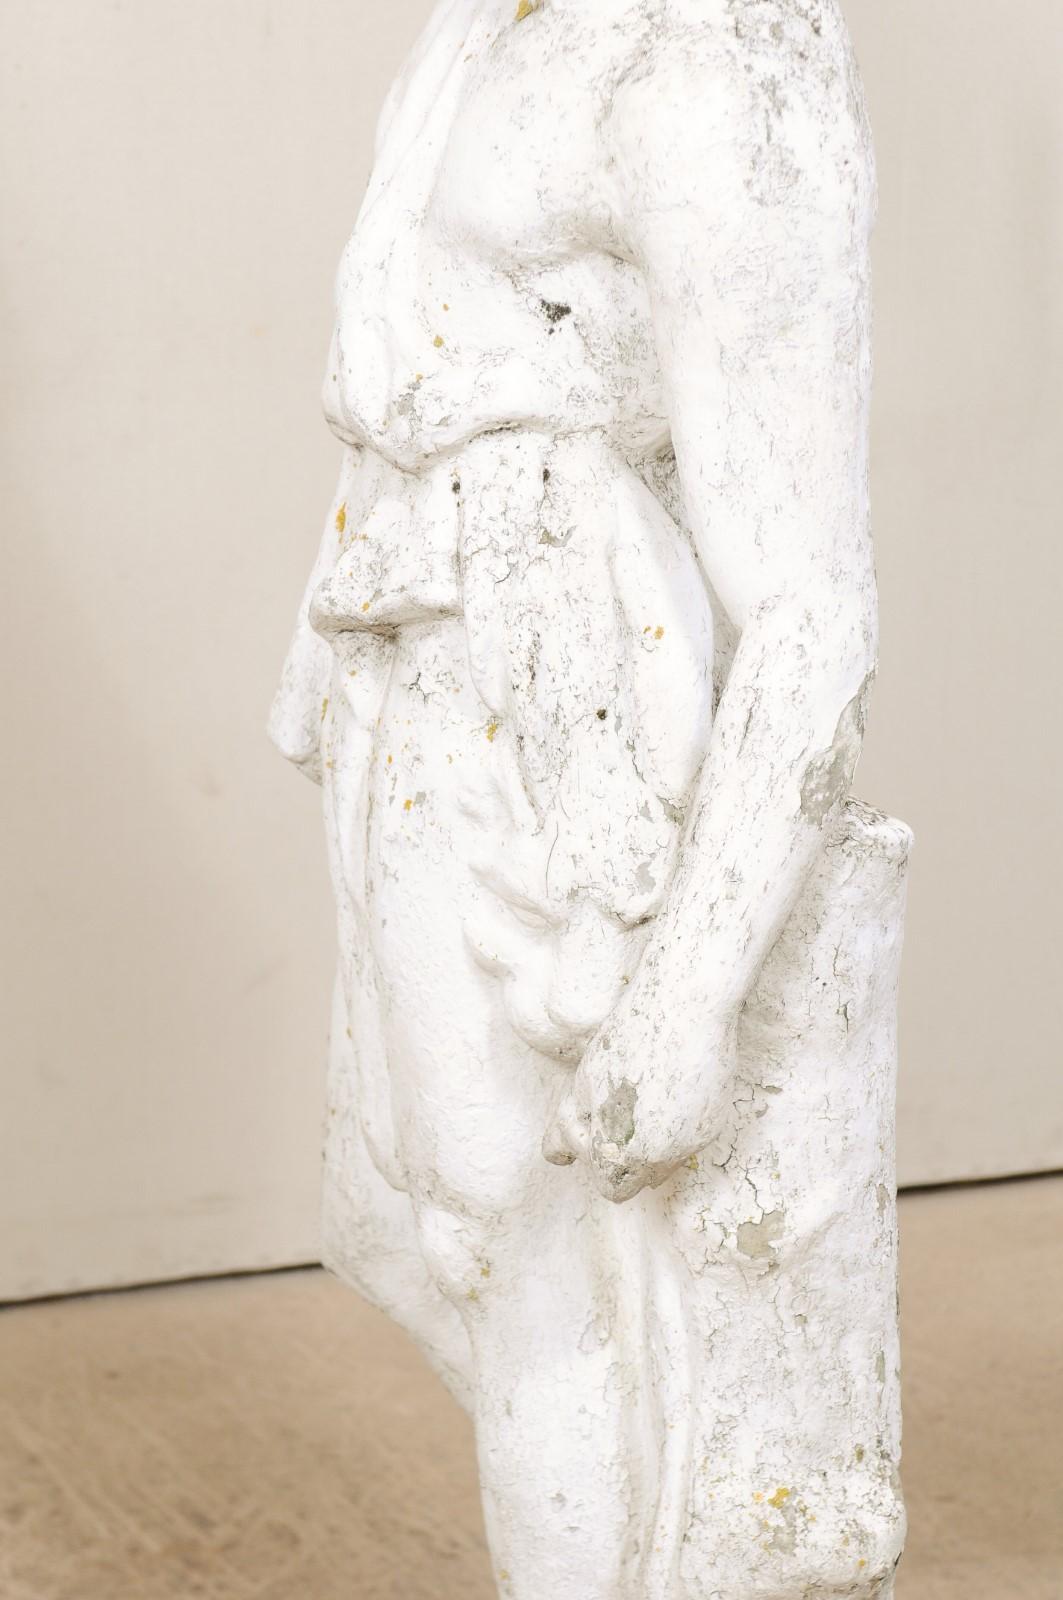 Classical Tall French Garden Sculpture of Male Figure from Early 20th Century For Sale 5